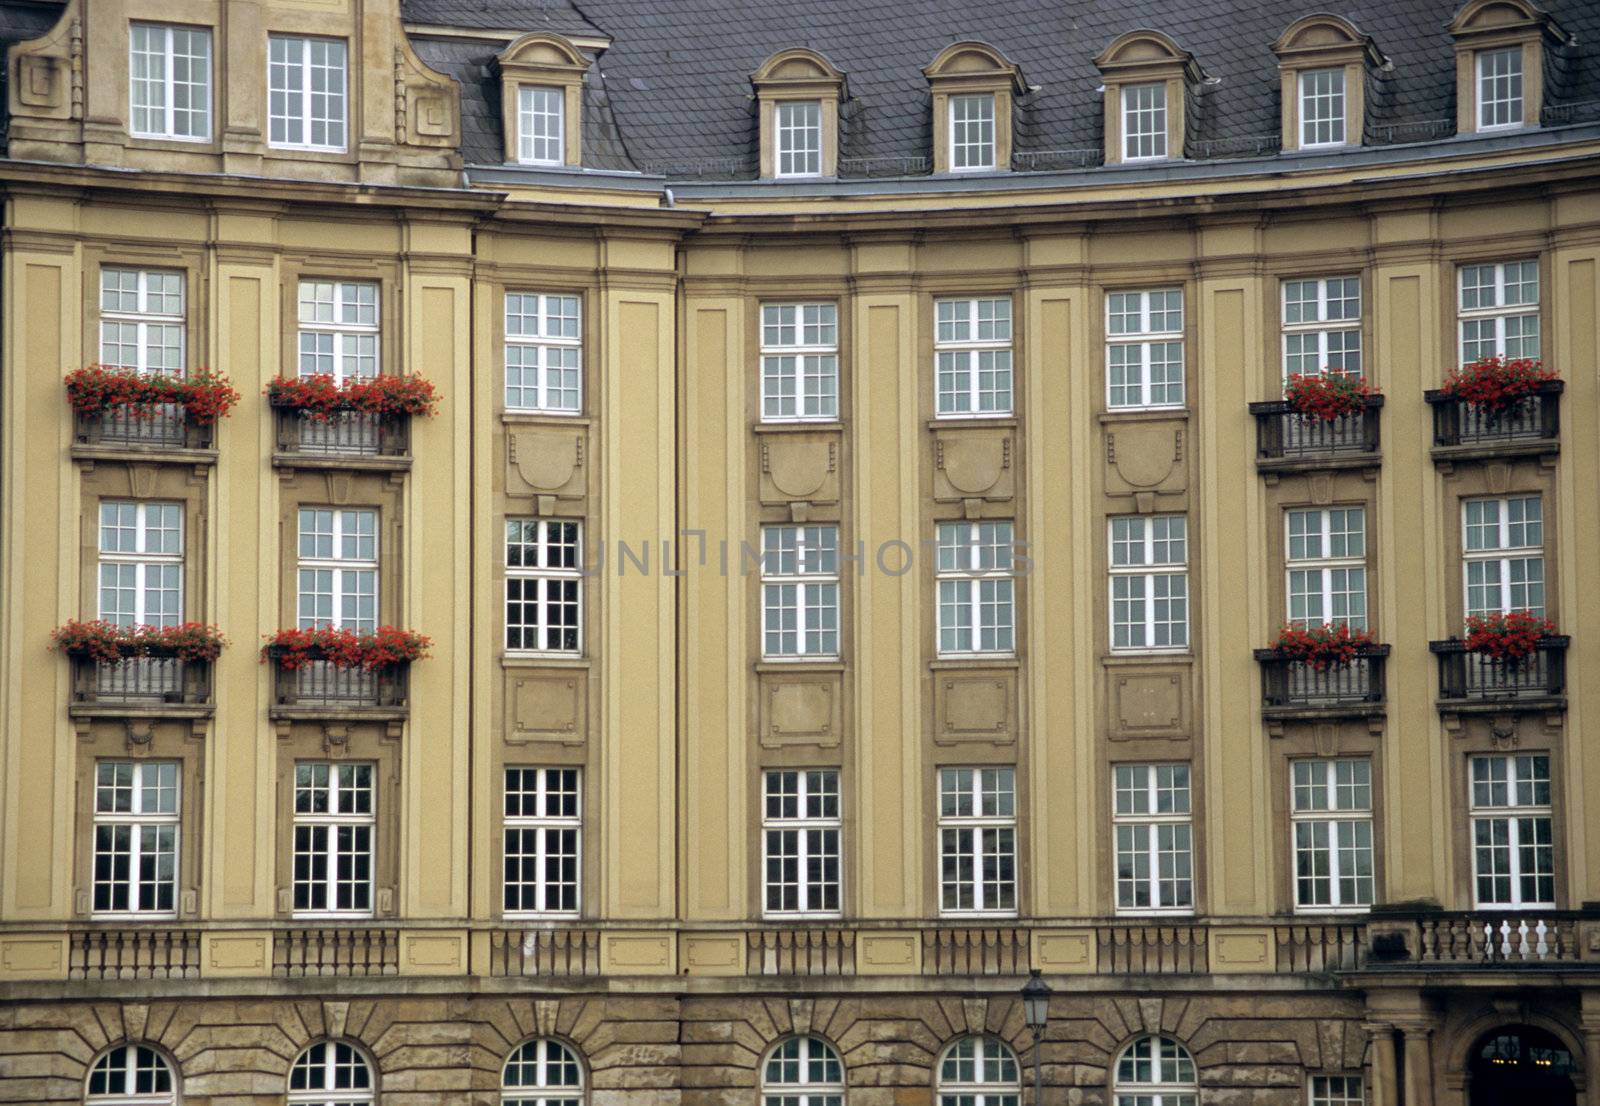 Rows and columns of windows on a Luxembourg building.